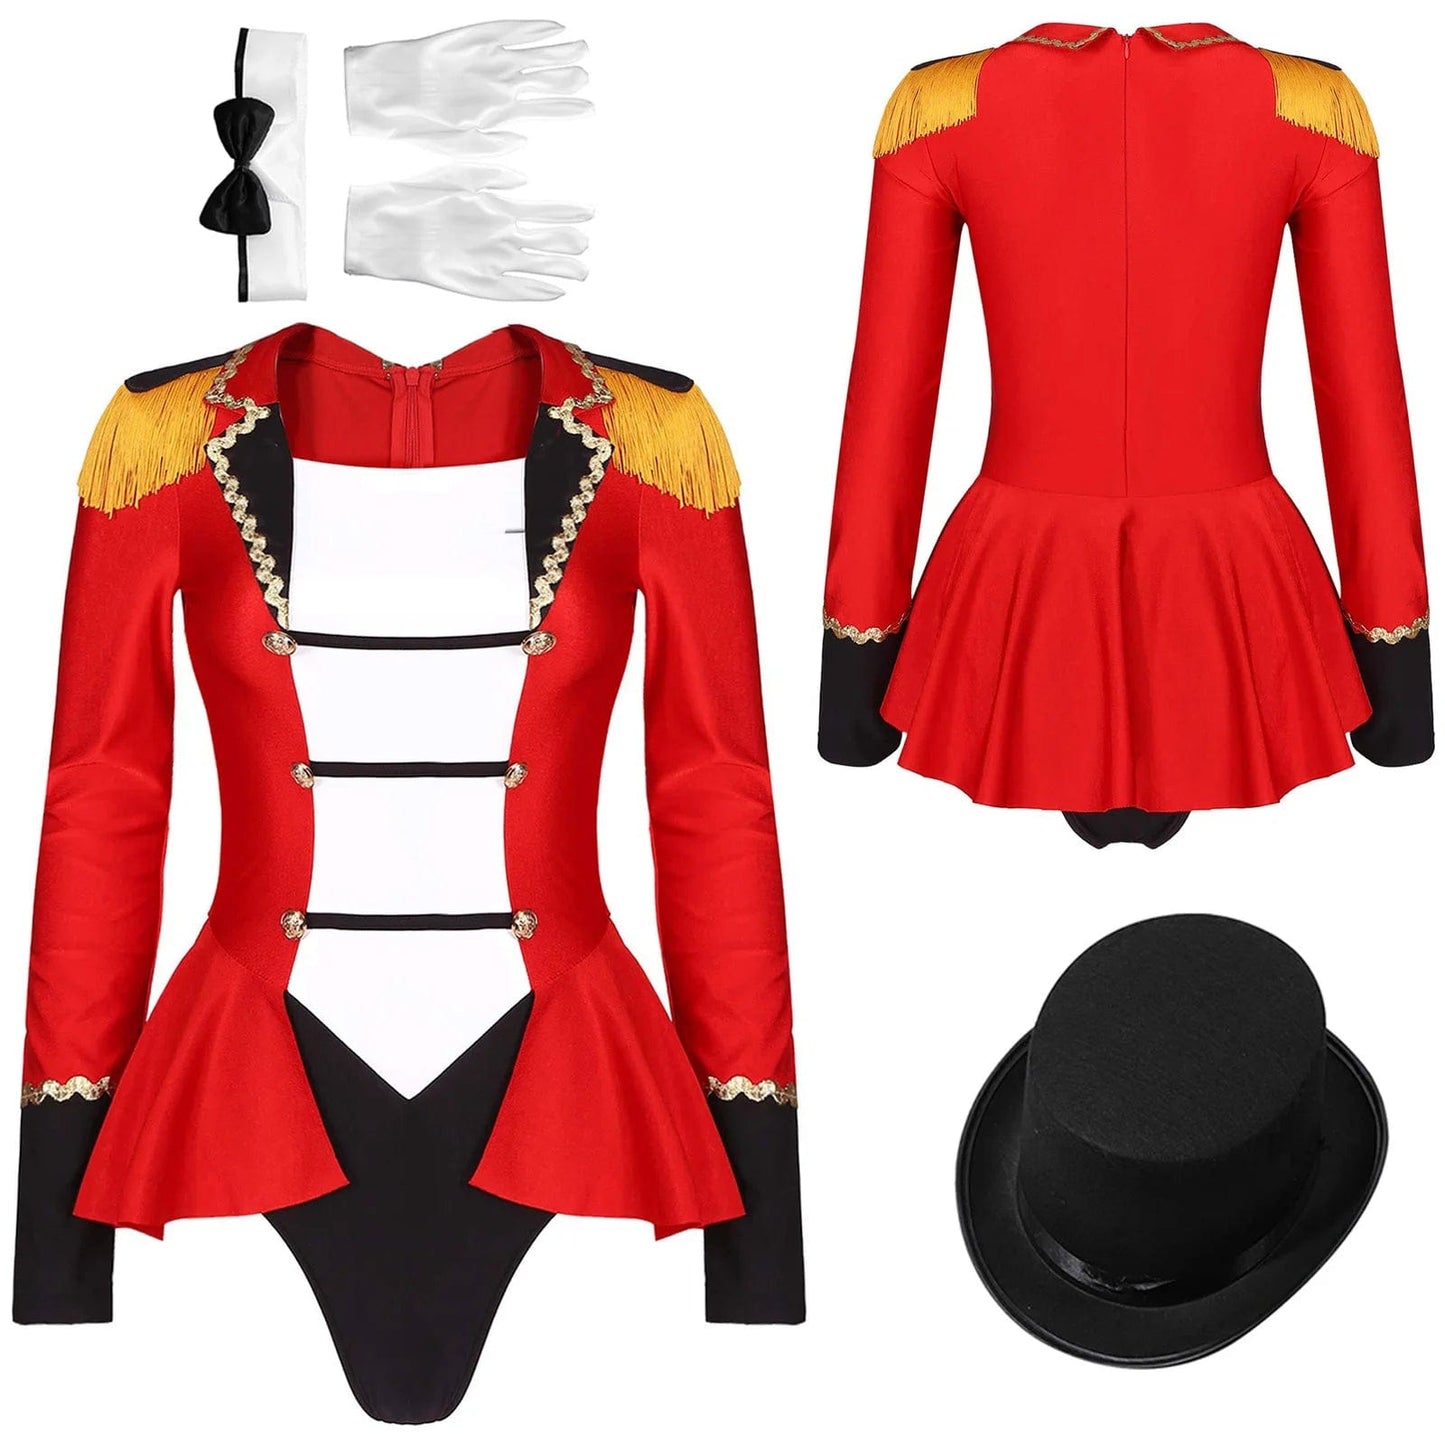 Kinky Cloth Red E / S Circus Ringmaster Outfit Costumes